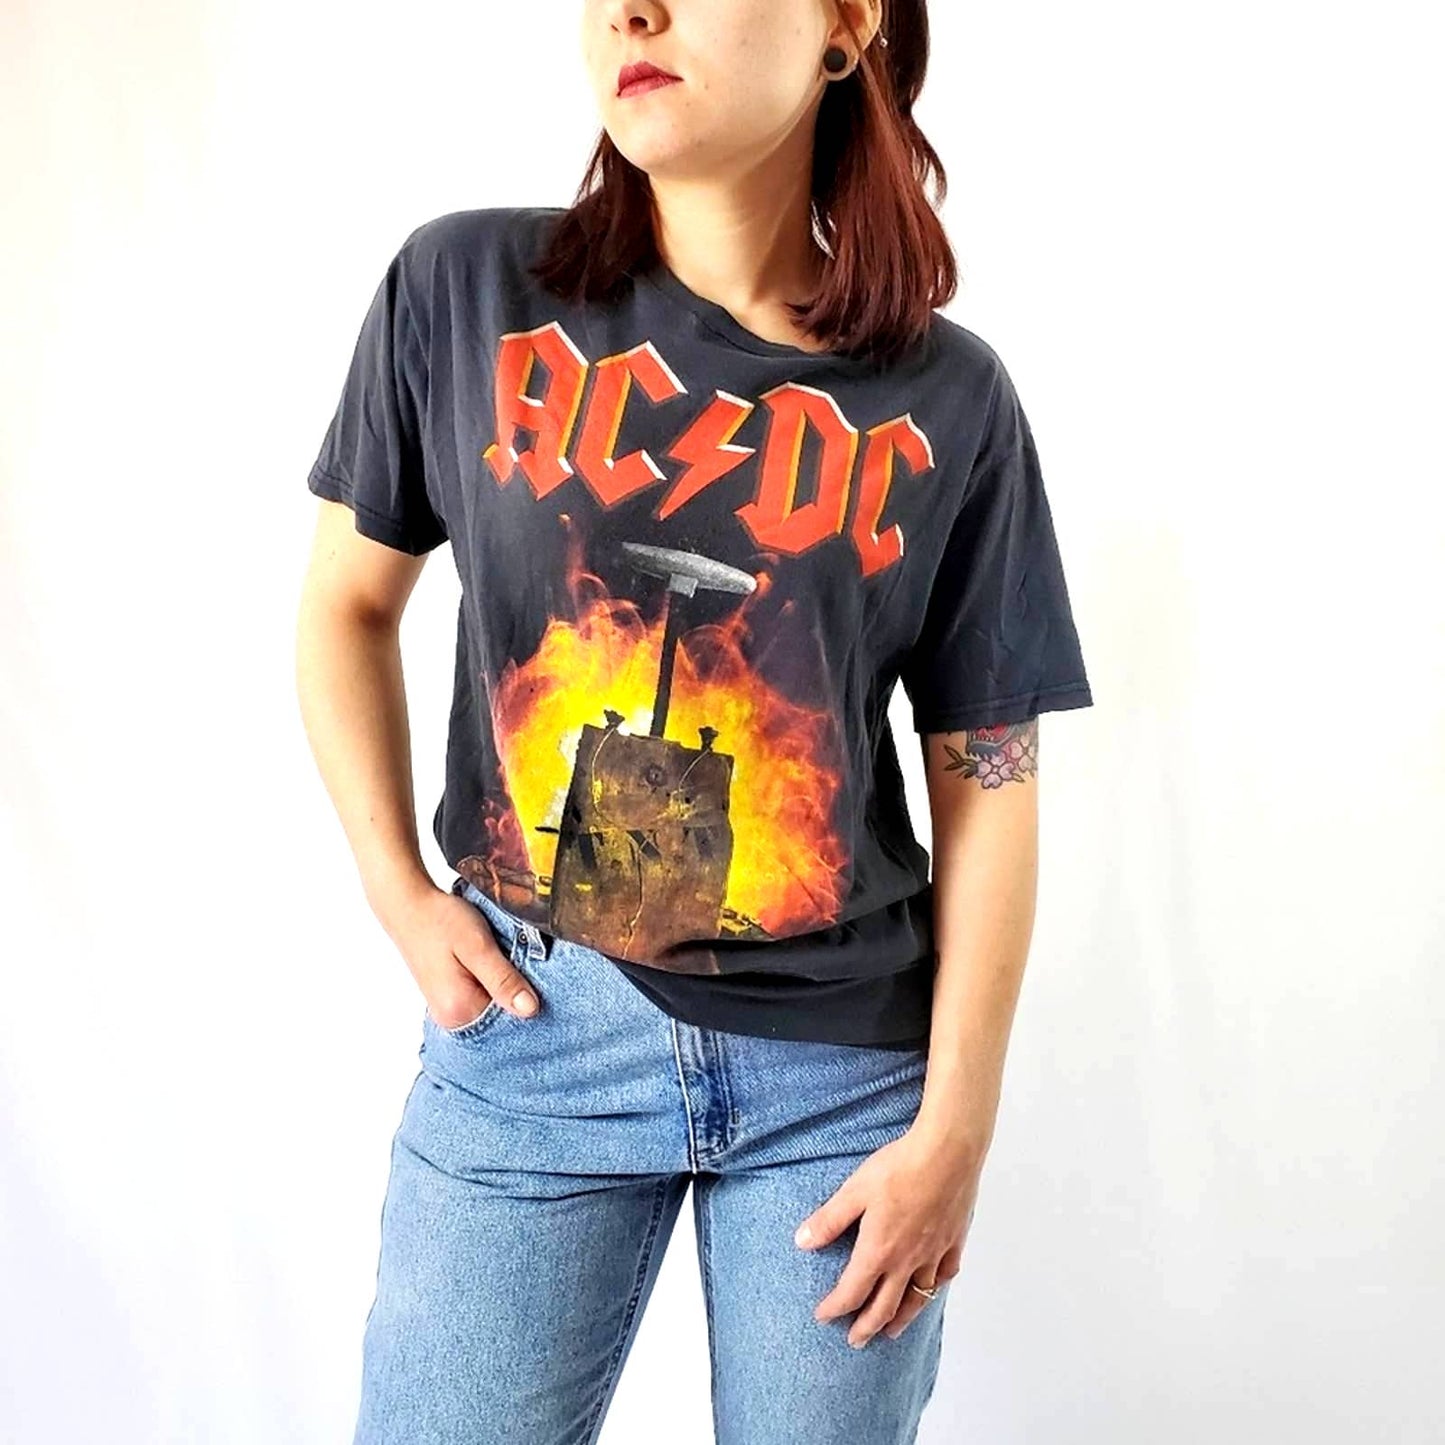 AC/DC Distressed Graphic Band Tee - M